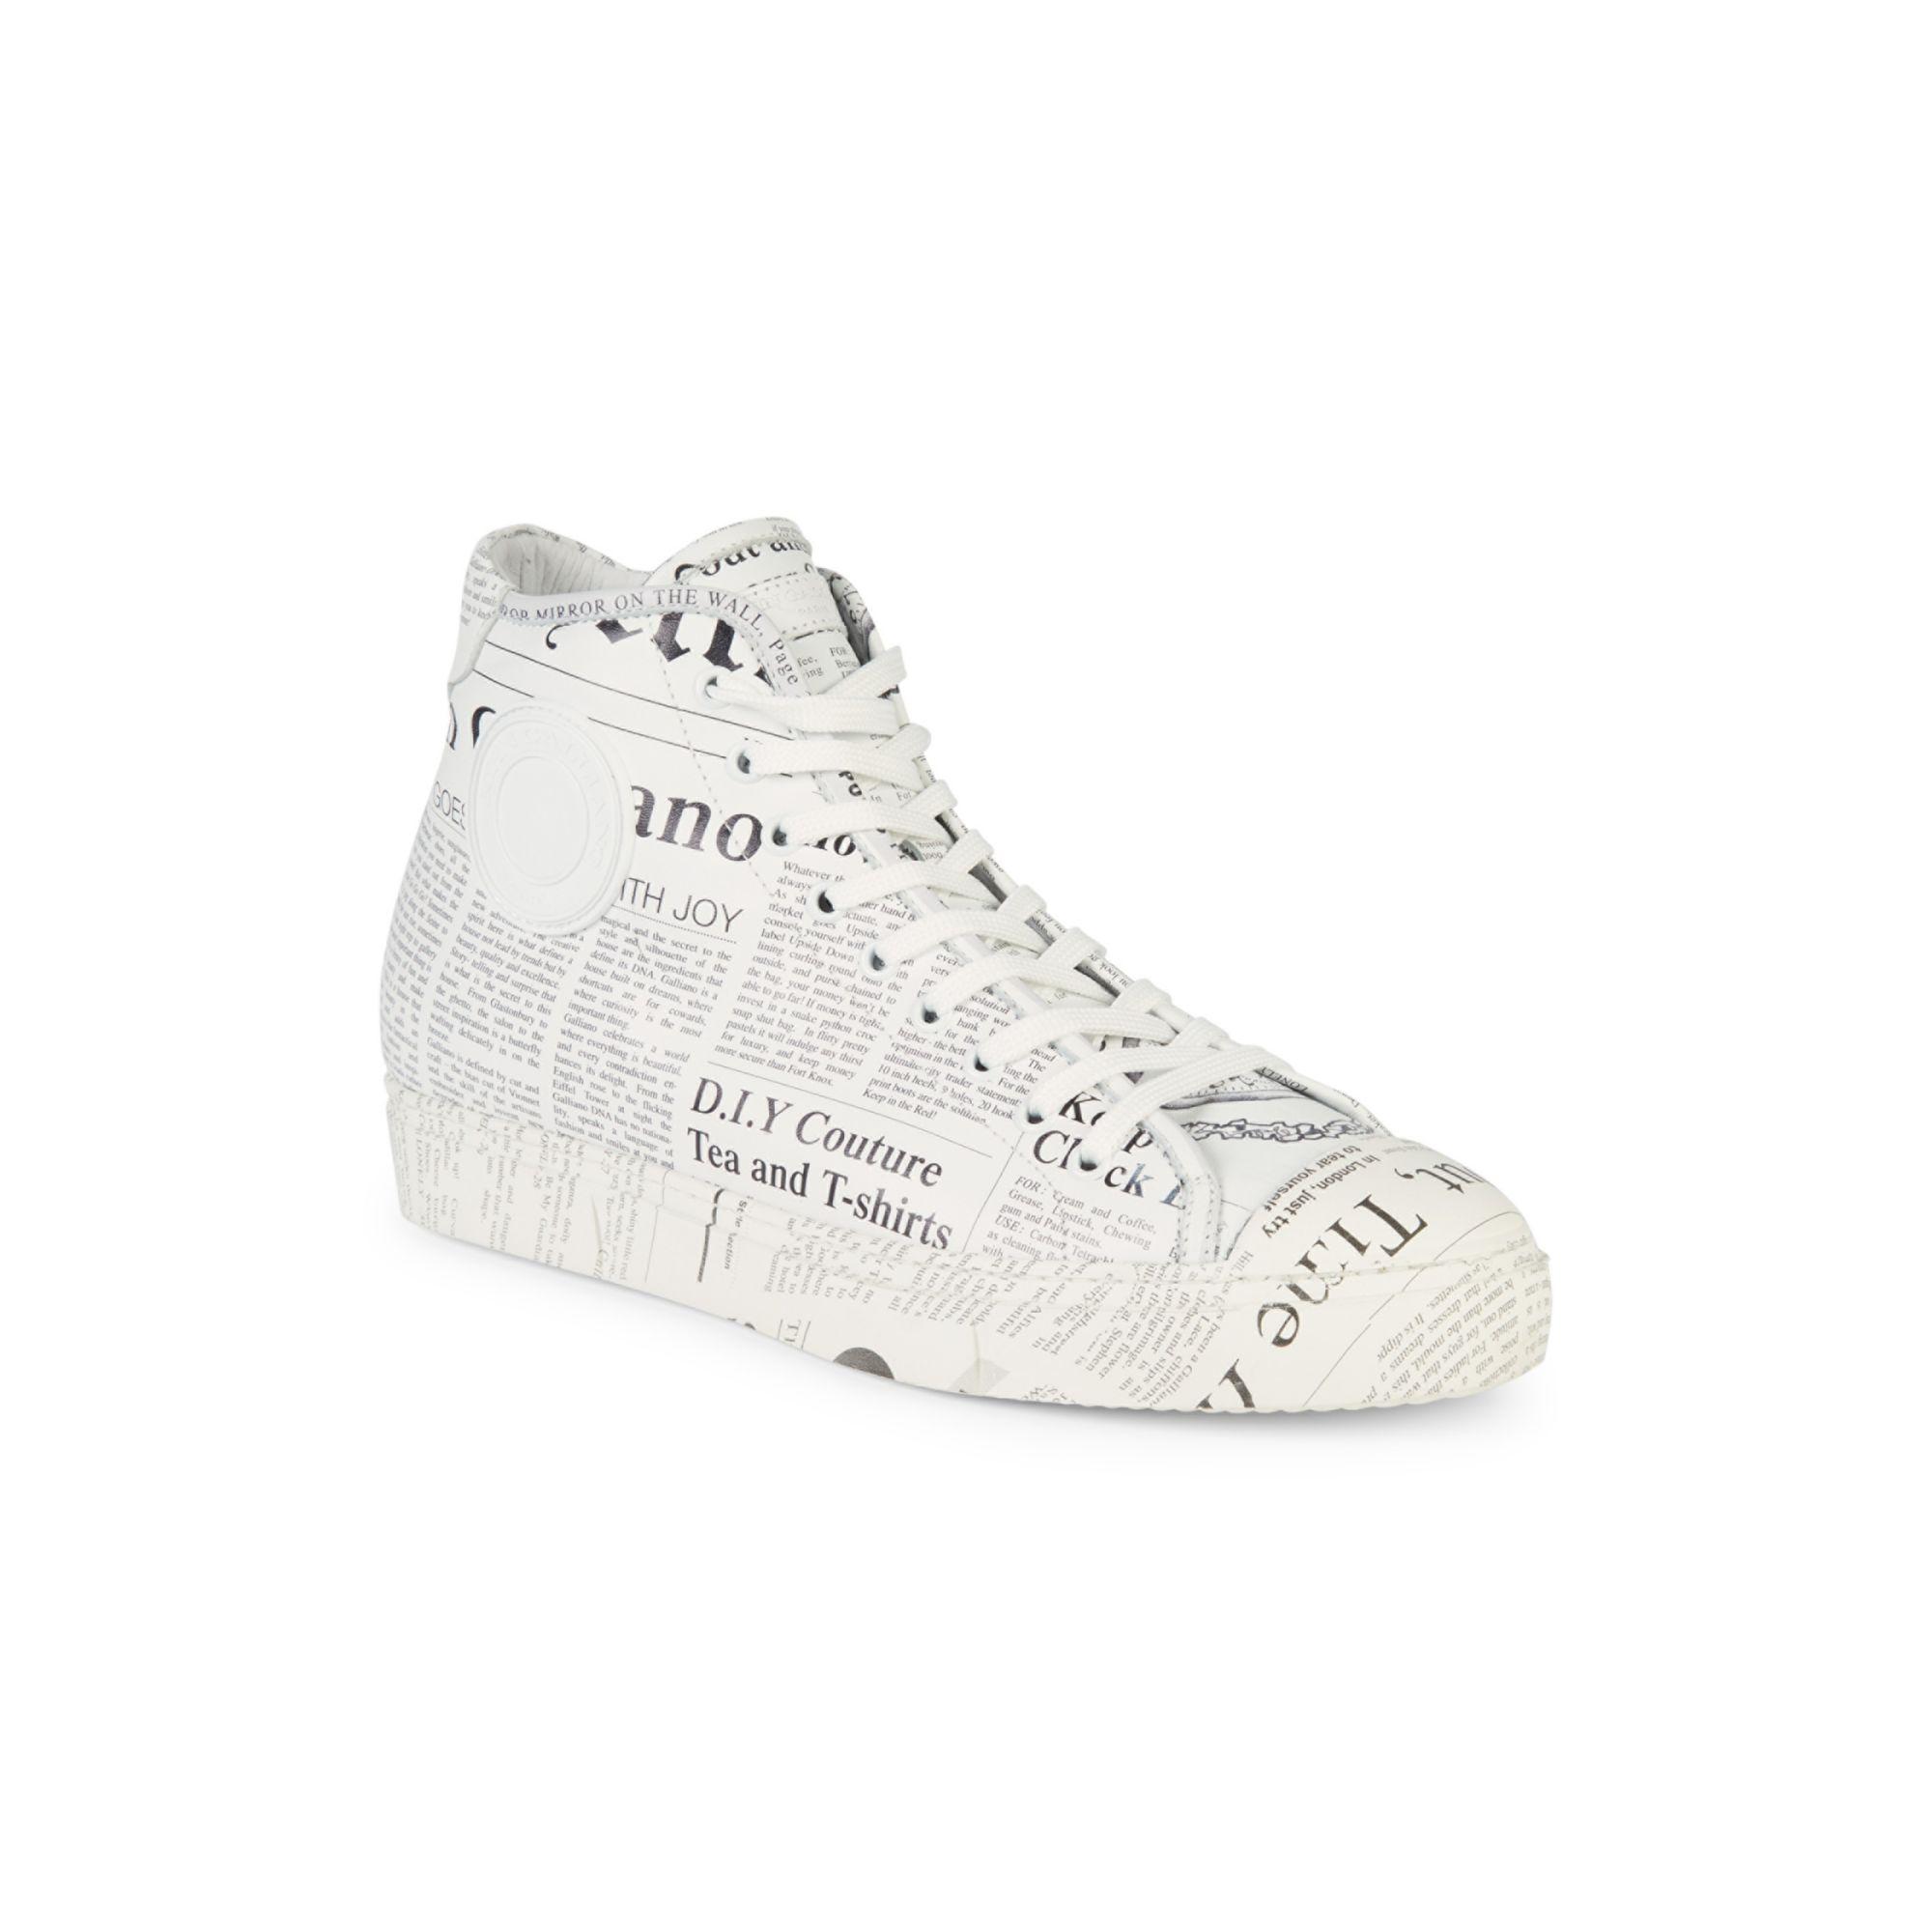 John Galliano Leather Gazette Newspaper Print High-top Sneakers in White  for Men | Lyst